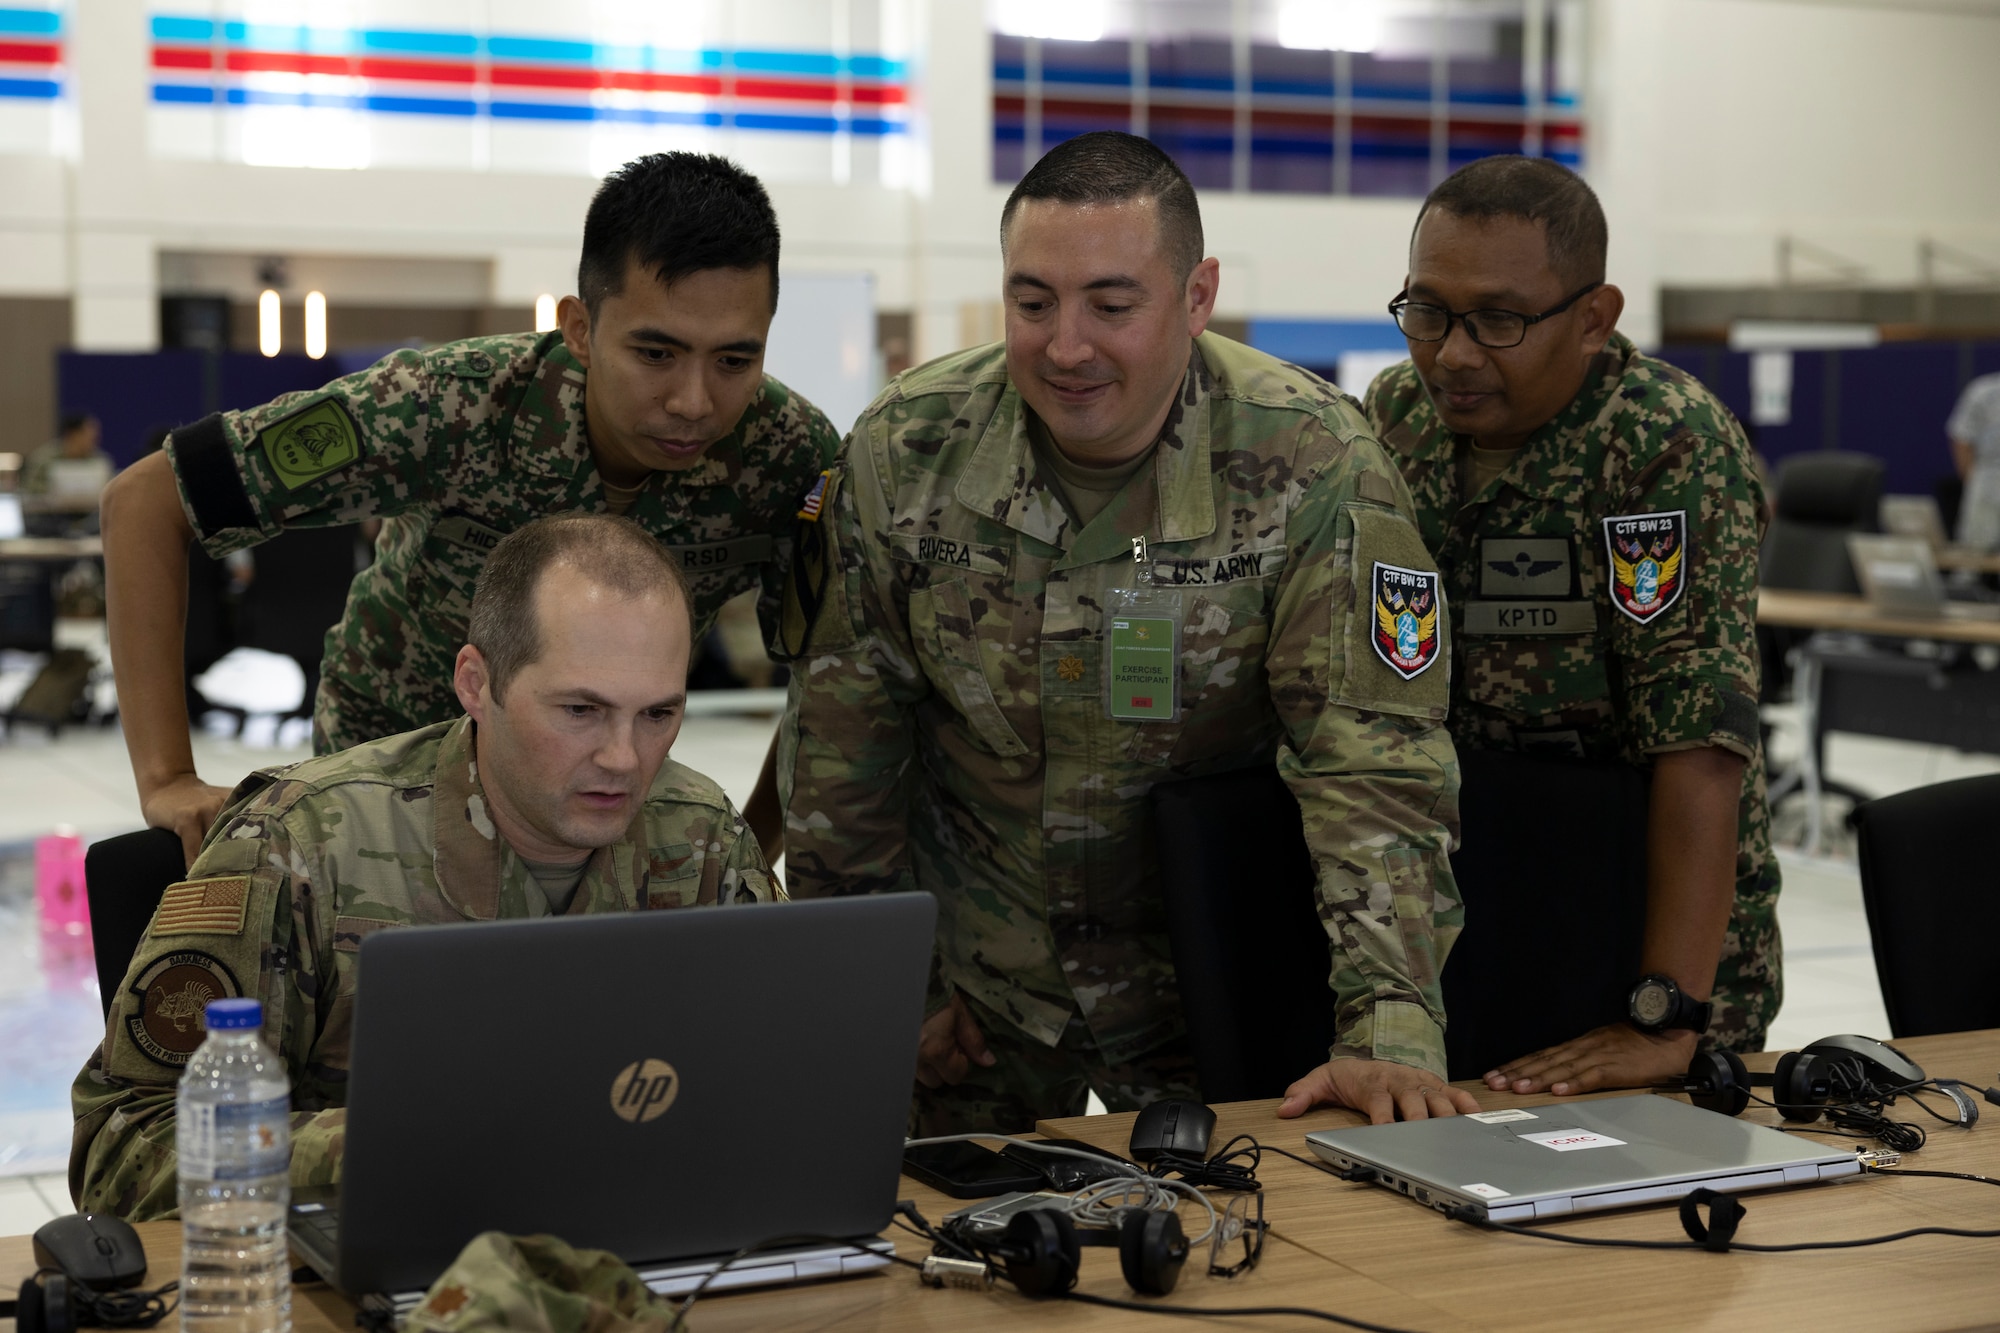 Malaysian and U.S. Armed Forces service members complete a mission analysis during the staff exercise of Bersama Warrior 23 at the Joint Warfighting Center on Malaysian Armed Forces Headquarters Base, Kuantan, Padang, Malaysia, June 5, 2023. The annual Bersama Warrior exercise is sponsored by U.S. Indo-Pacific Command and hosted by the Malaysian Armed Forces.